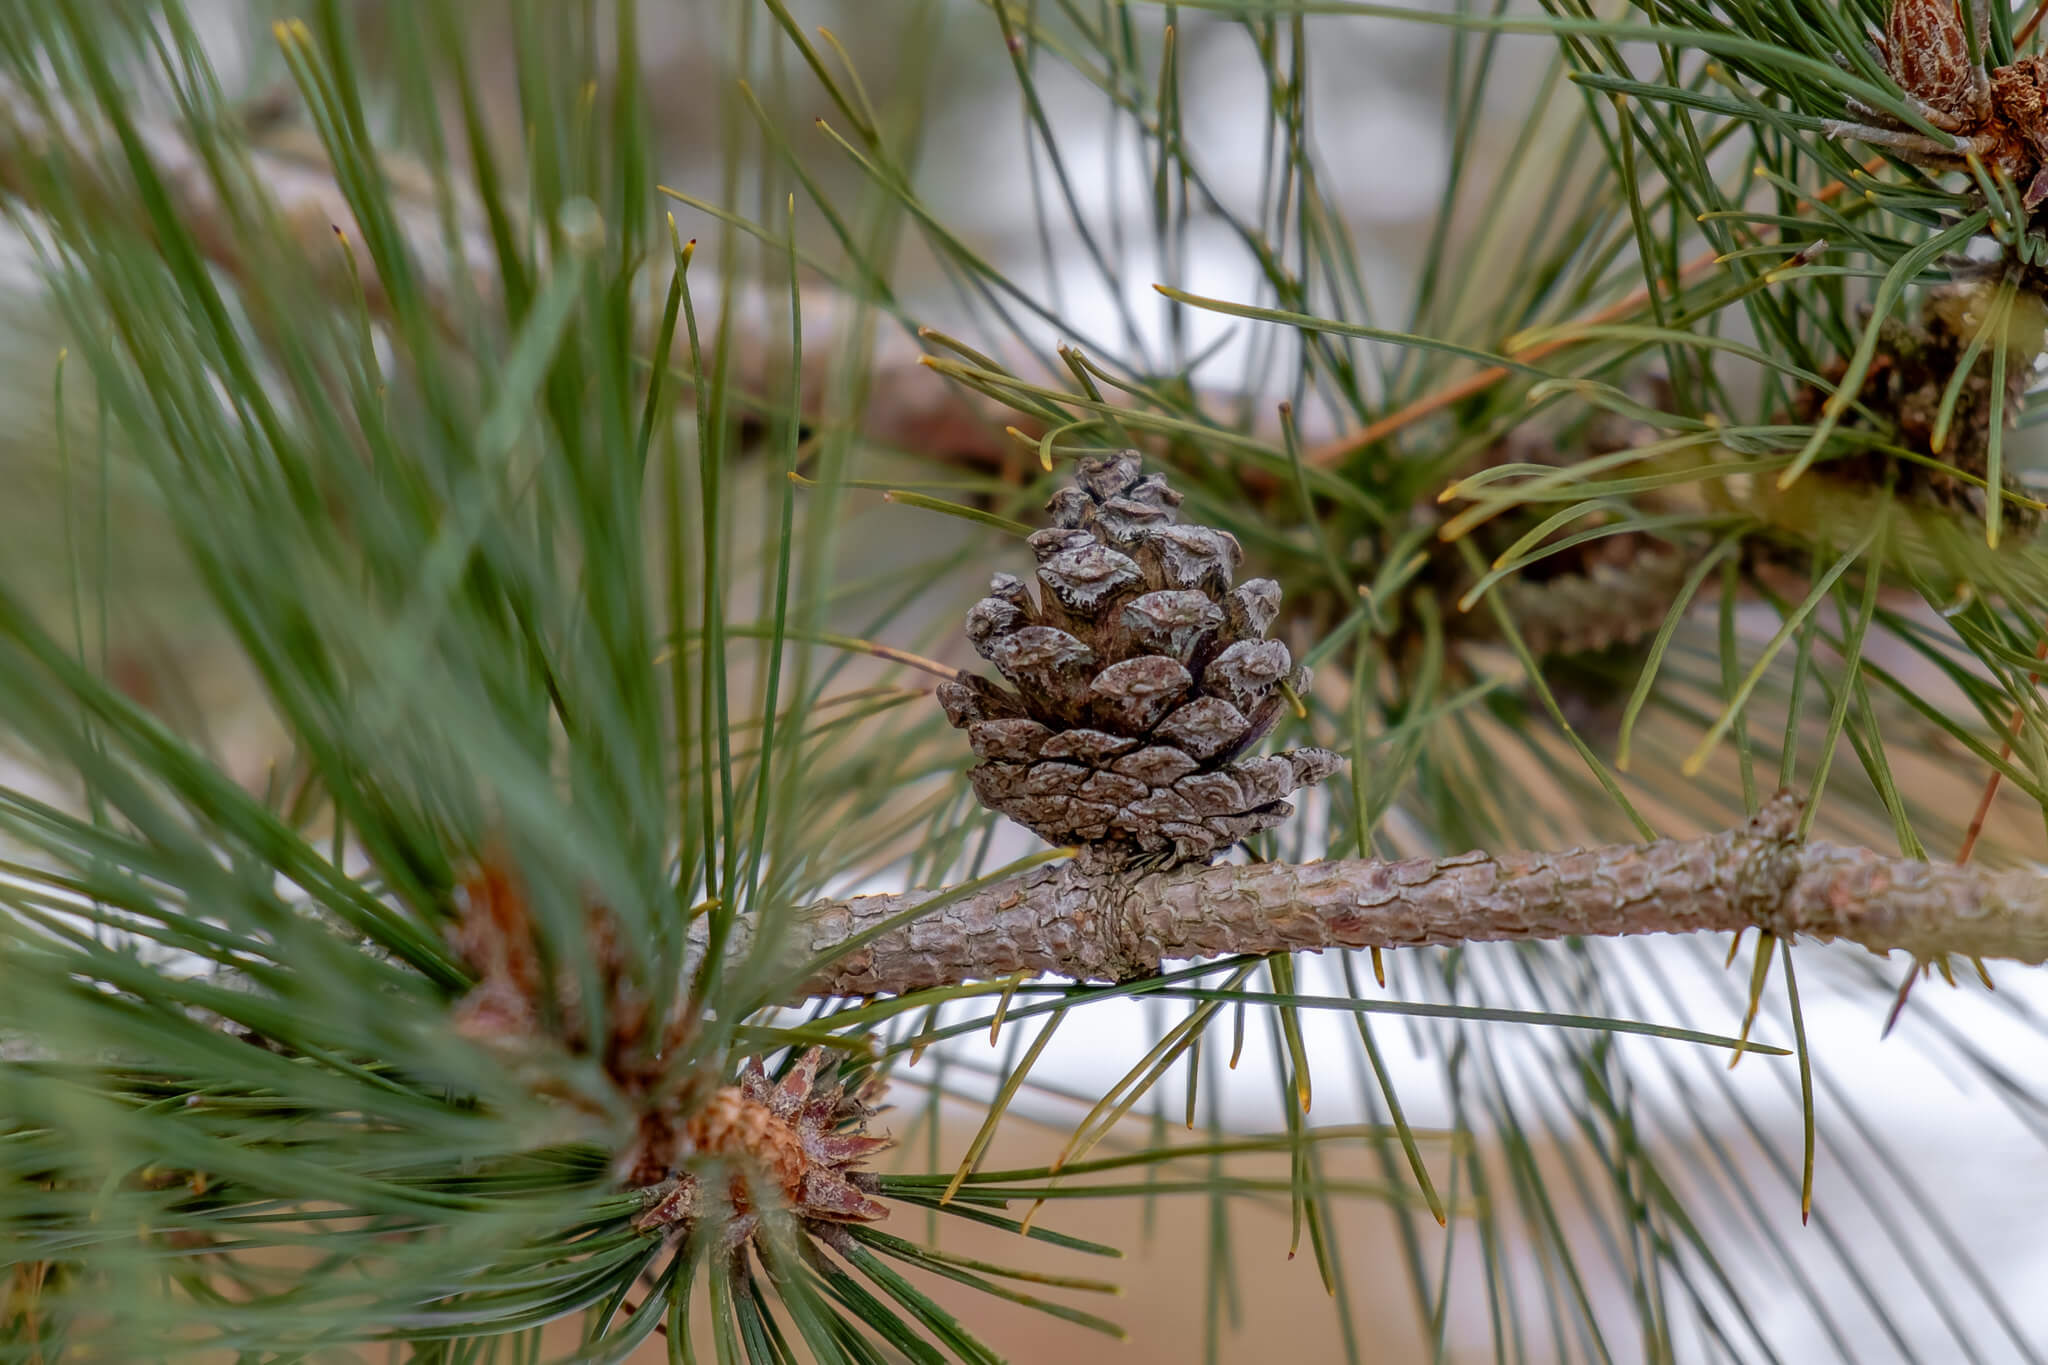 Knowles-Nelson Stewardship Program - close up of a single small pinecone on a branch